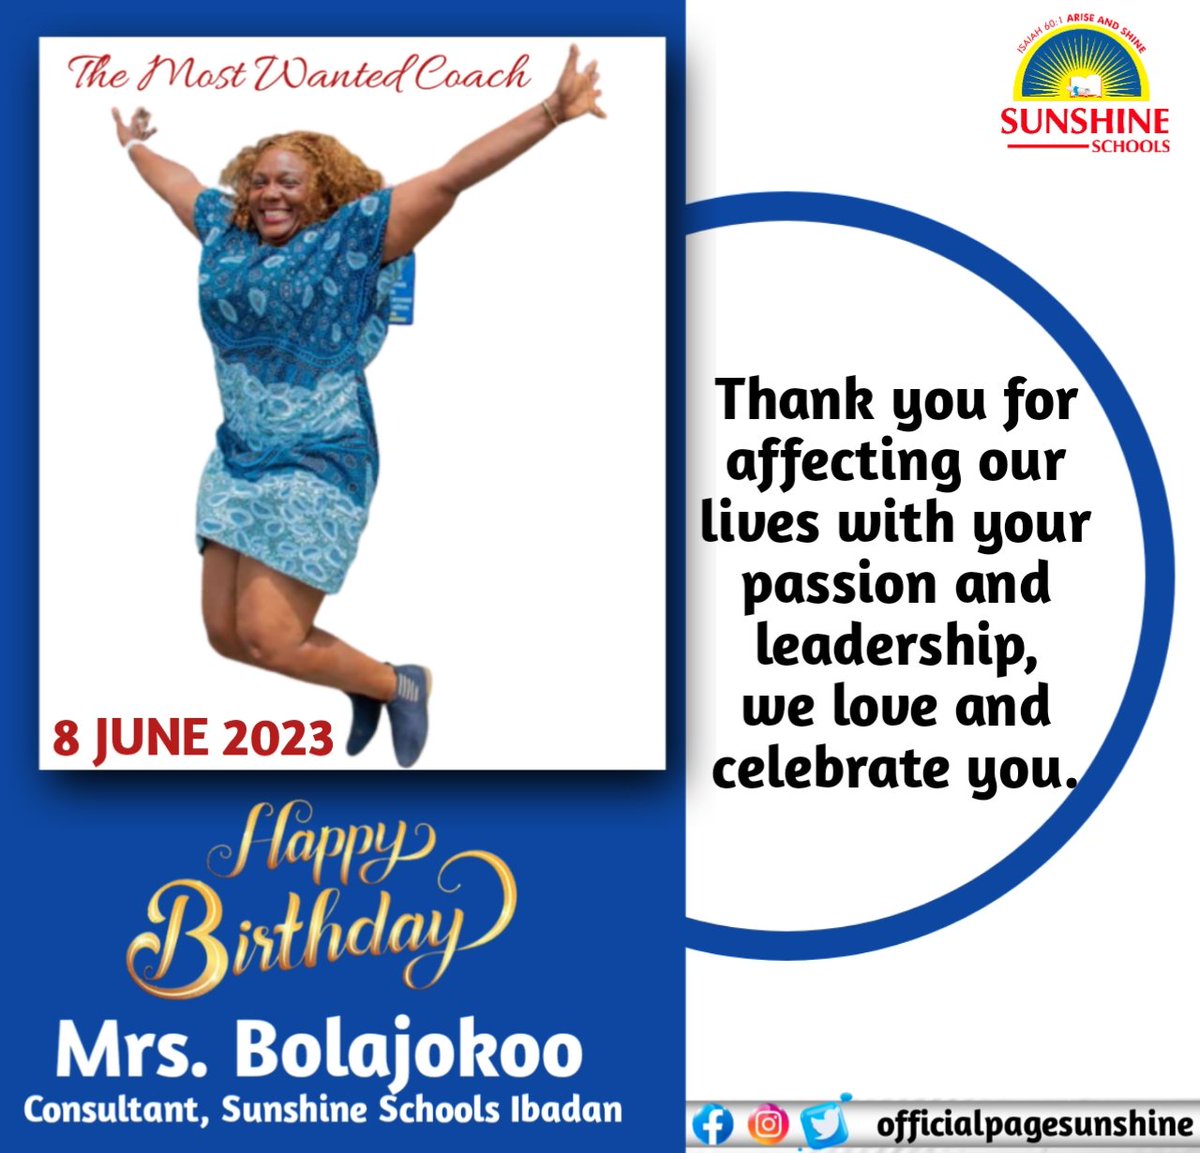 Happy birthday to a visionary leader · A leader like you is a true inspiration · An extraordinary and inspirational leader · You lead with elegance and grace.

Bolajokoo Owolabi
#birthdays
#birthdaycelebration